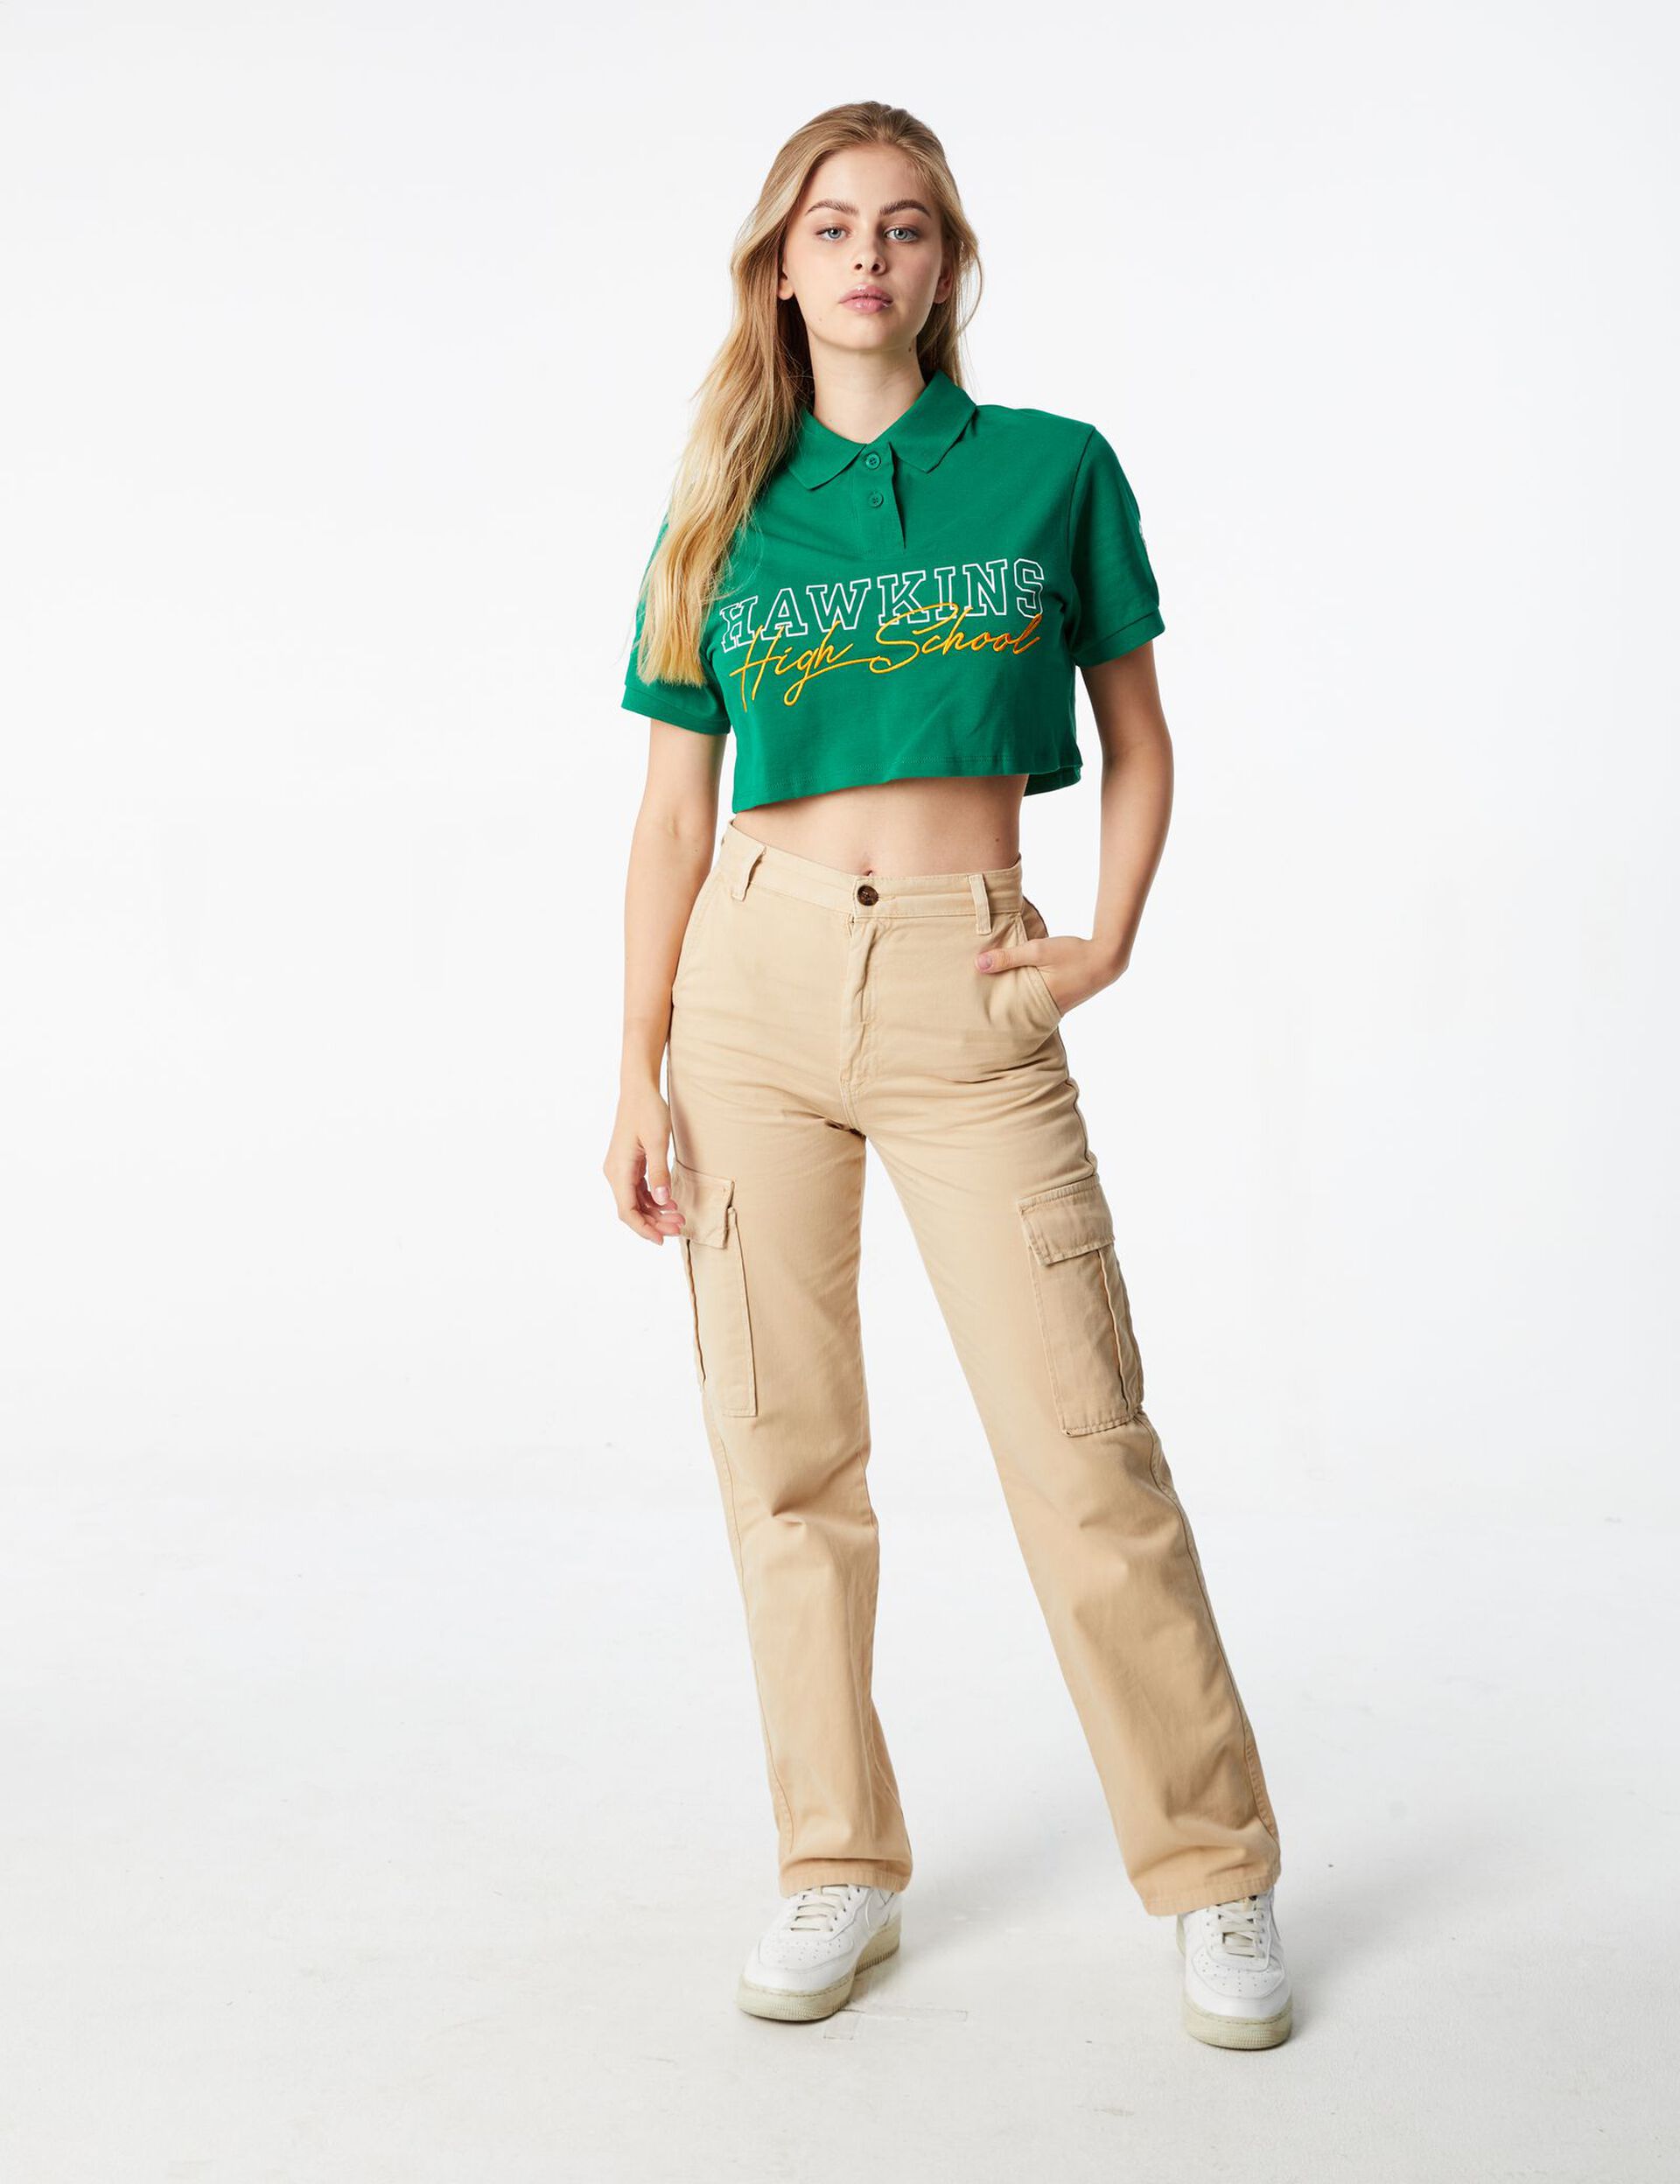 Stranger Things cropped polo shirt